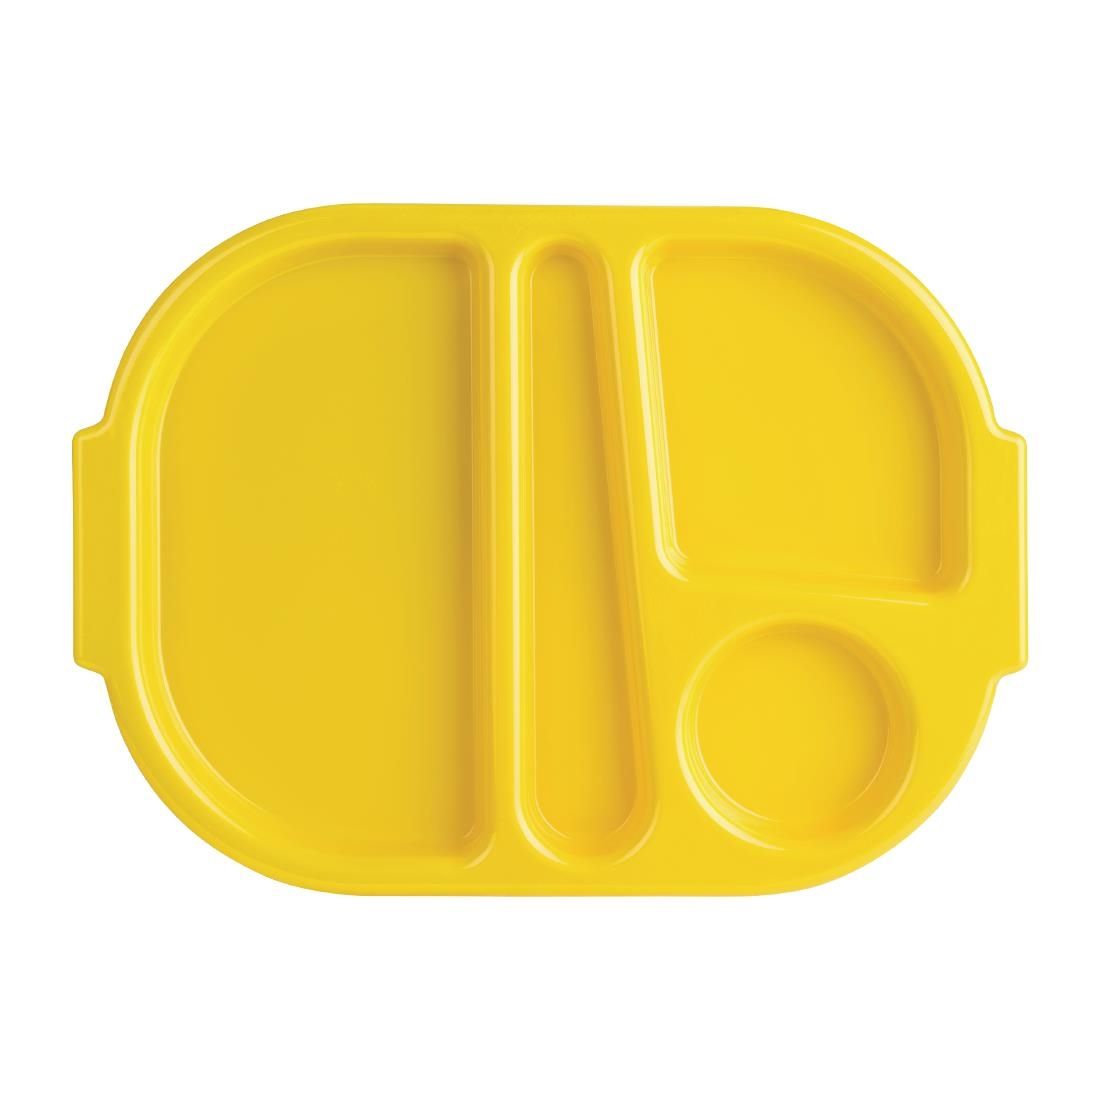 U039 Kristallon Large Polycarbonate Compartment Food Trays Yellow 375mm